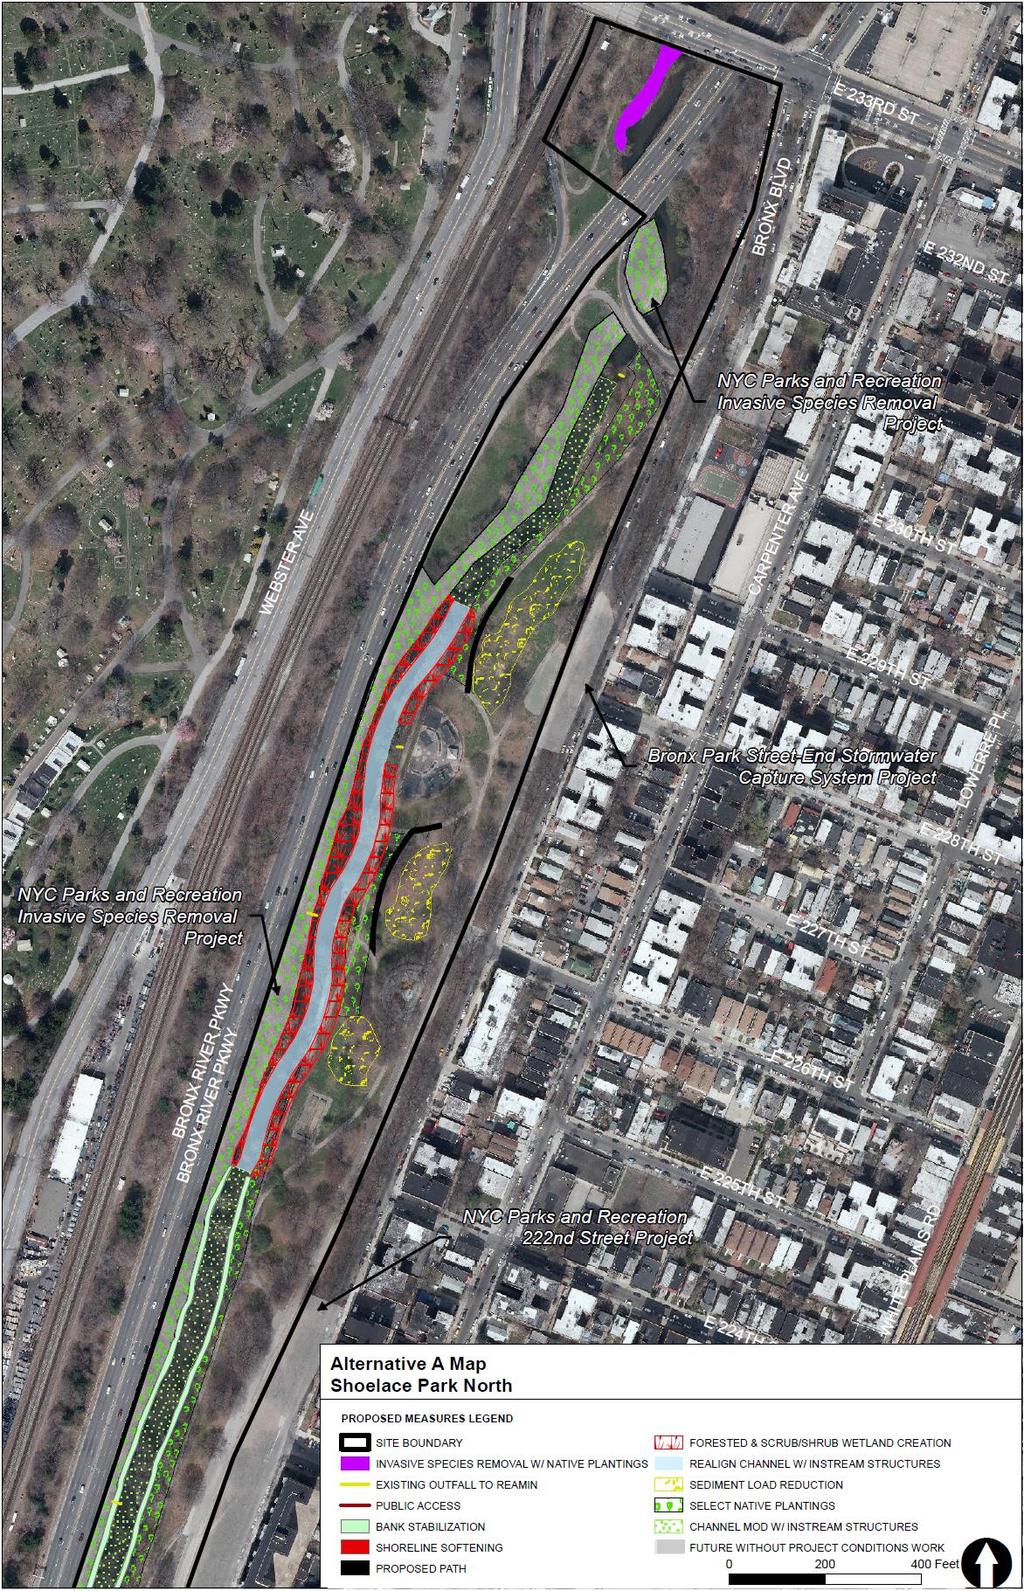 (North and South) Tentatively Selected Plan Design: Restoration of Bronx River reach to pre-industrialization conditions: realigns channel with natural meanders and restores large tracts of forested